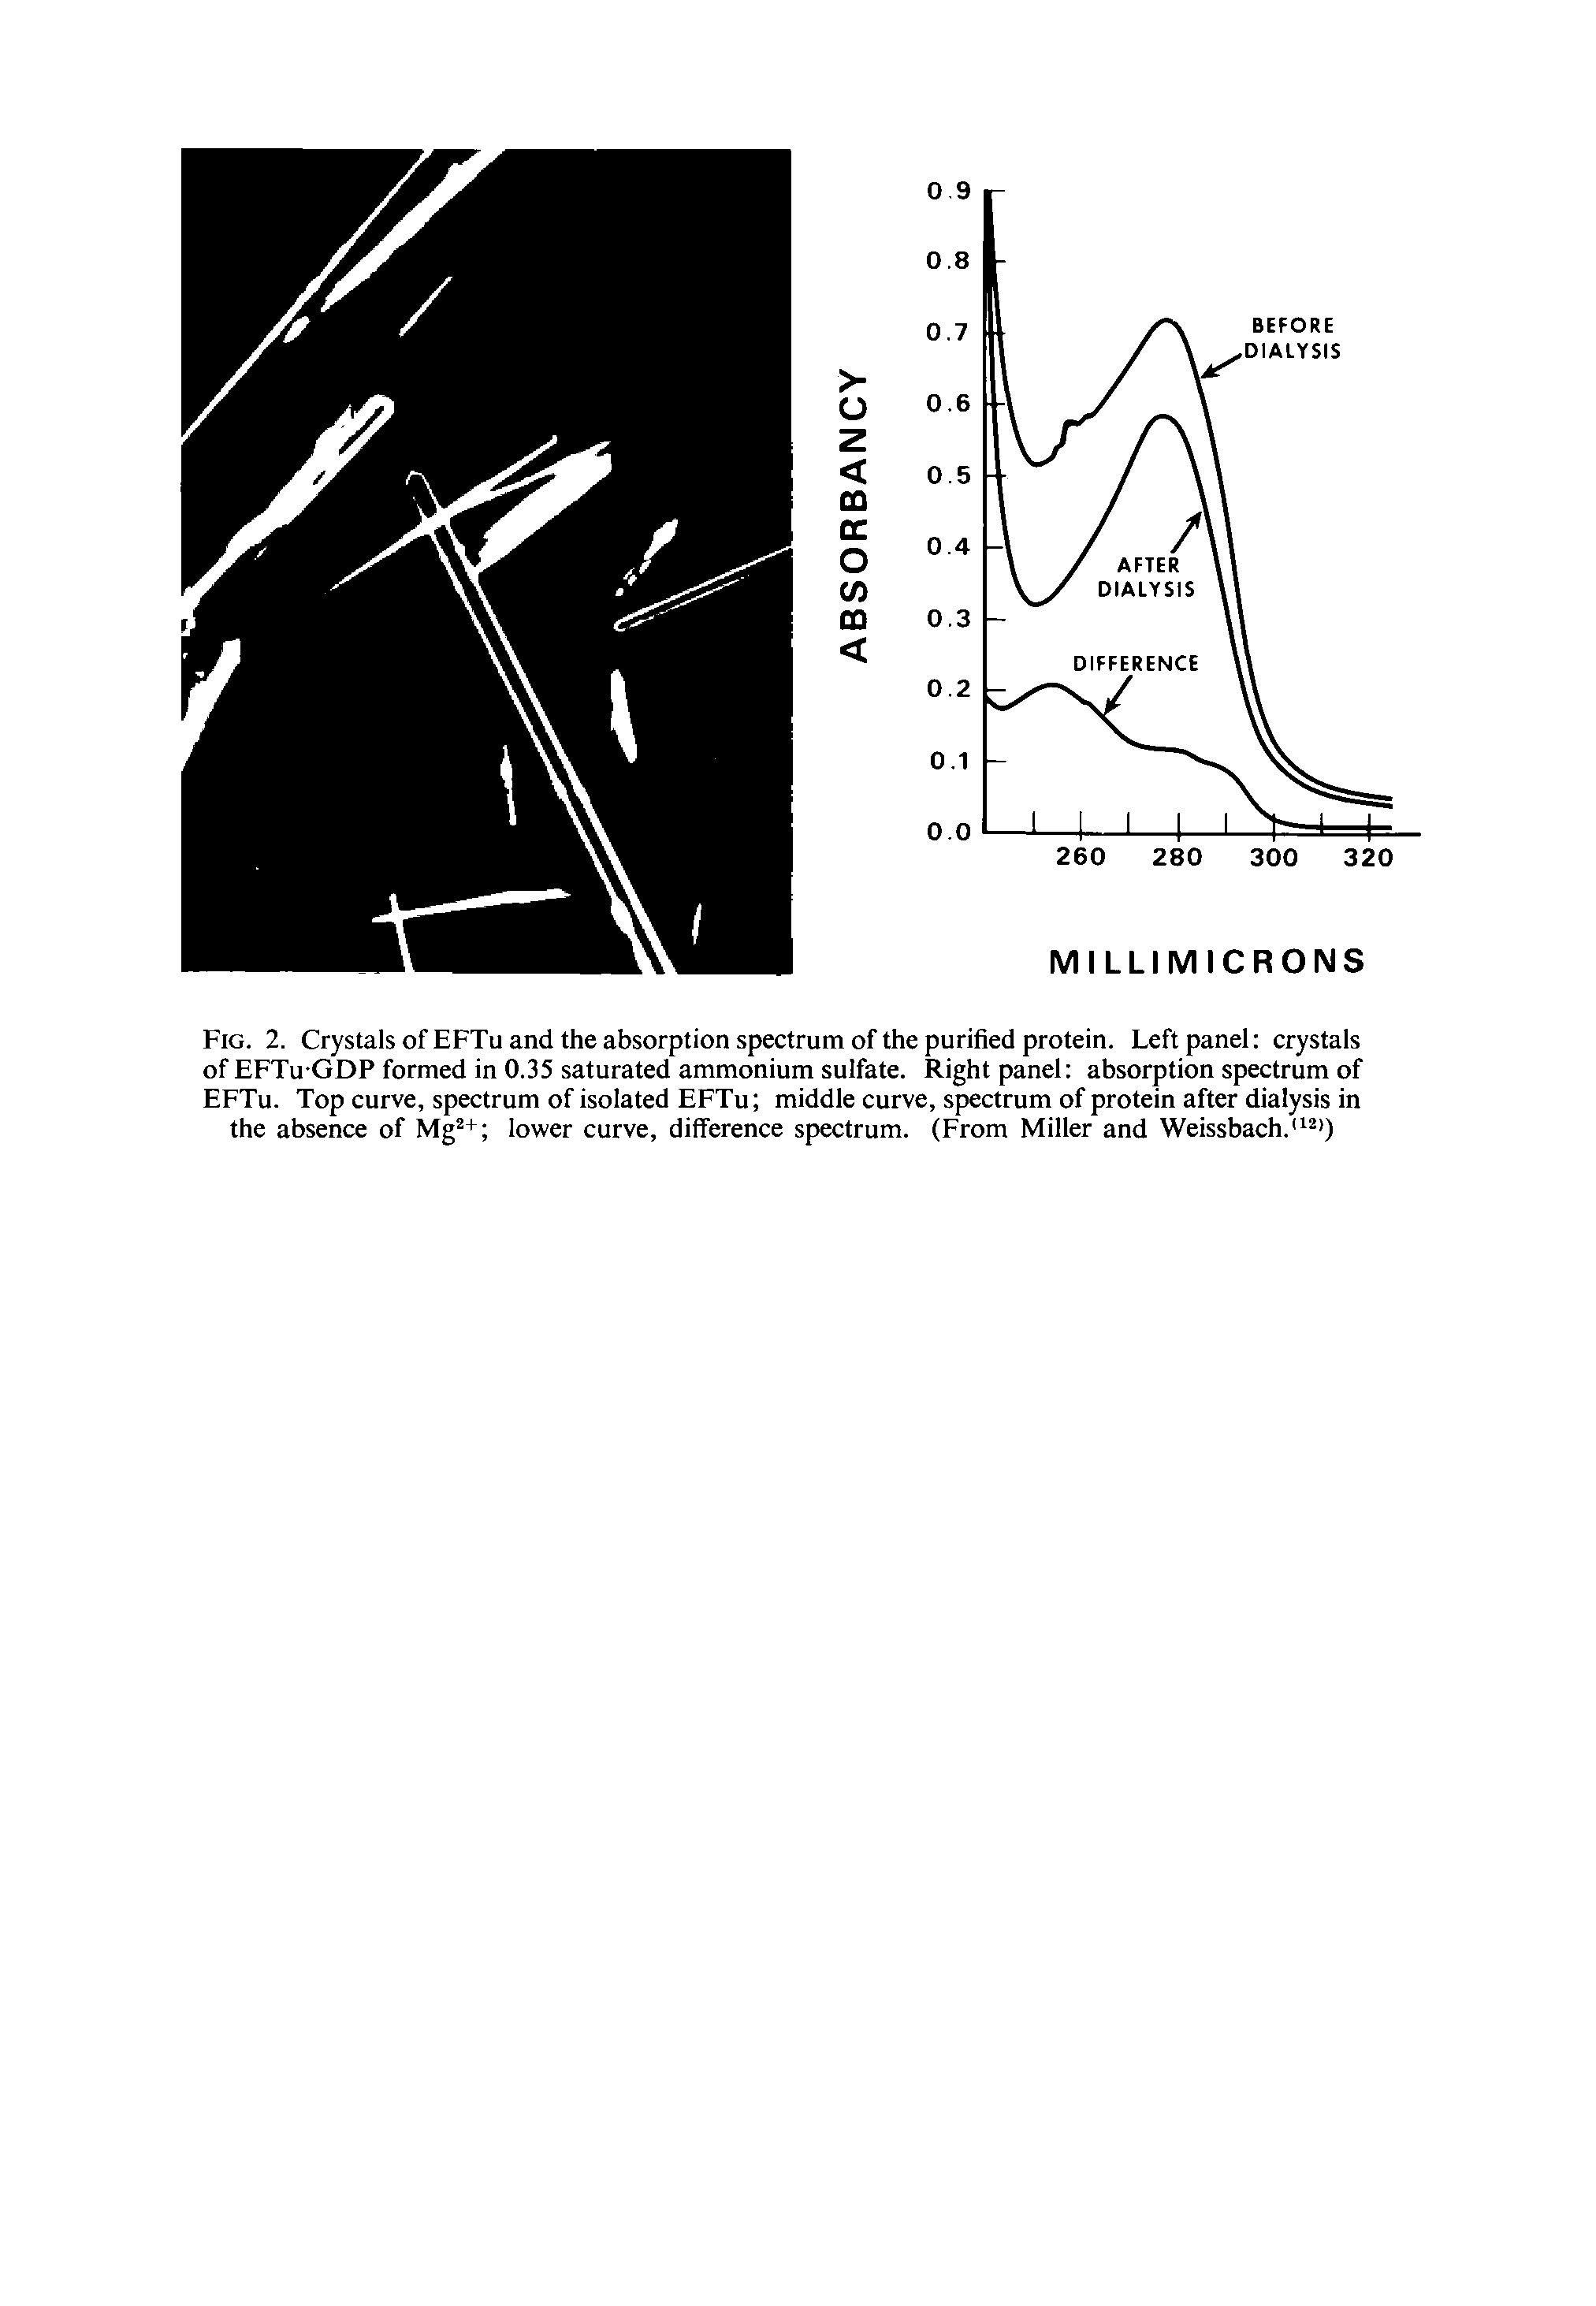 Fig. 2. Crystals of EFTu and the absorption spectrum of the purified protein. Left panel crystals of EFTu GDP formed in 0.35 saturated ammonium sulfate. Right panel absorption spectrum of EFTu. Top curve, spectrum of isolated EFTu middle curve, spectrum of protein after dialysis in the absence of Mg + lower curve, difference spectrum. (From Miller and Weissbach. )...